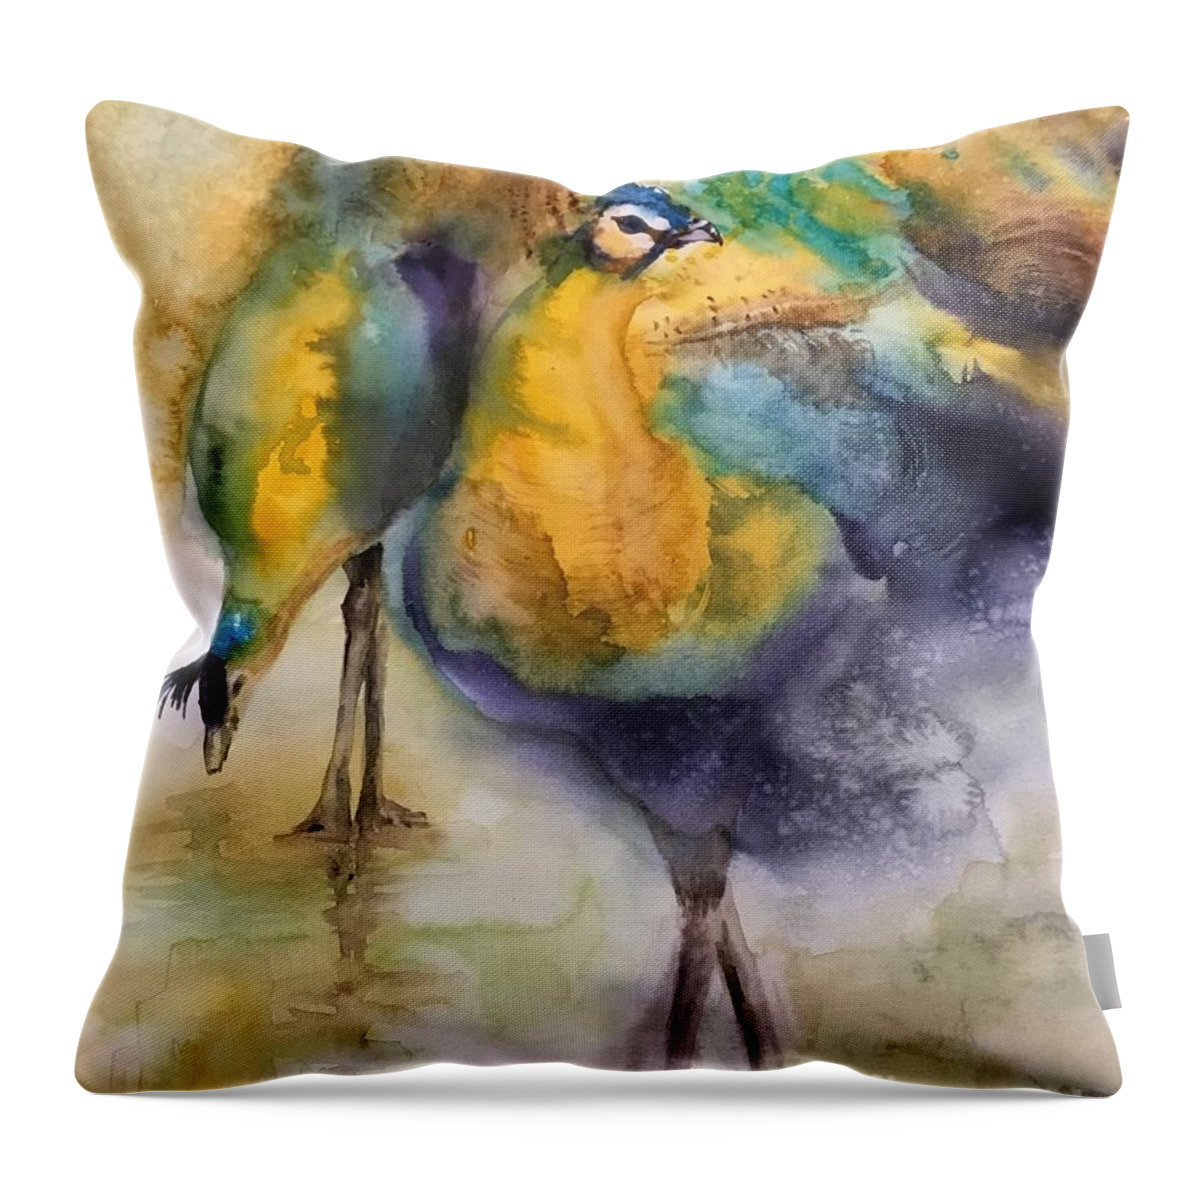 1182021 Throw Pillow featuring the painting 1182021 by Han in Huang wong